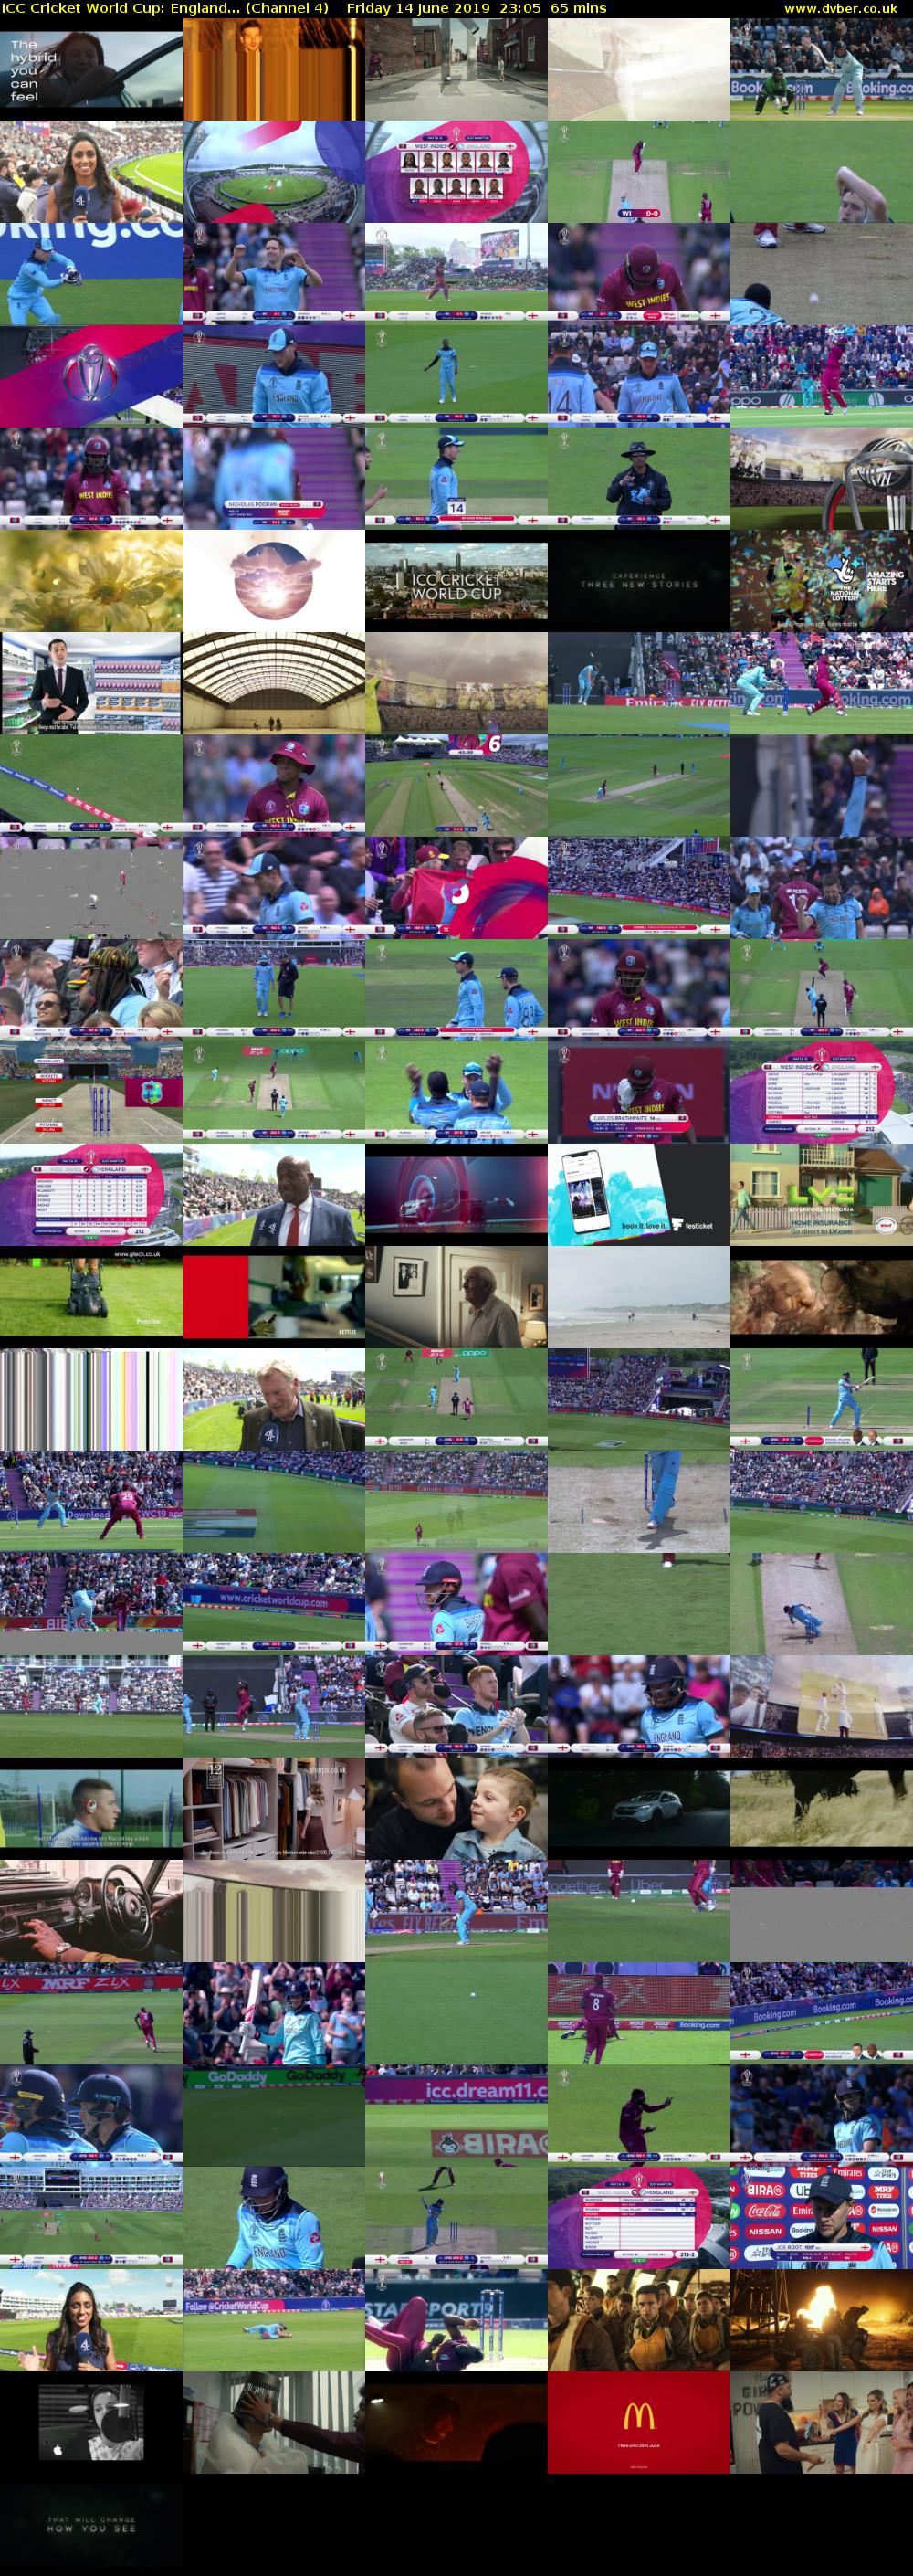 ICC Cricket World Cup: England... (Channel 4) Friday 14 June 2019 23:05 - 00:10